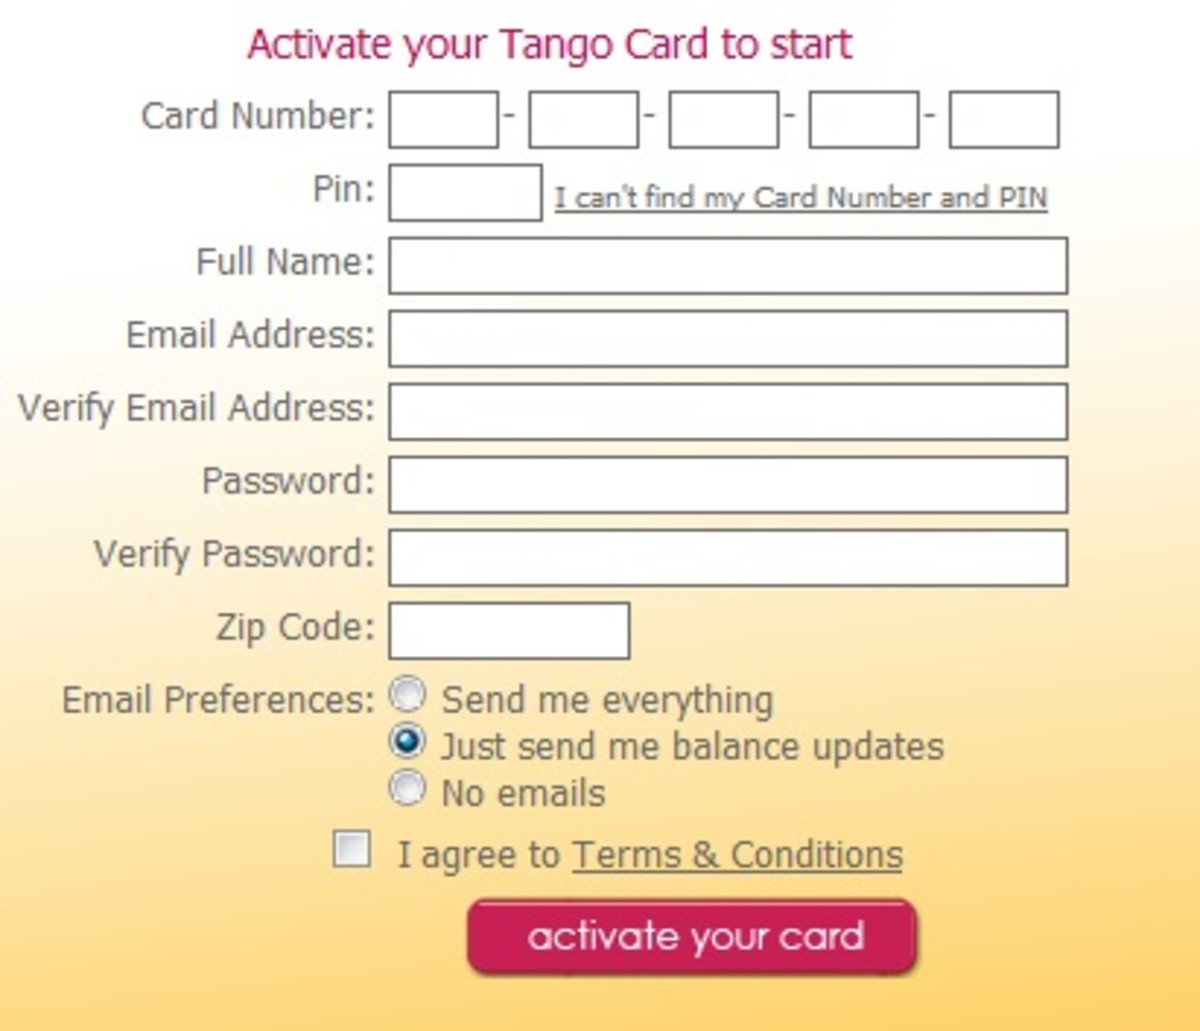 Tango cards can be activated via the web, or through the mobile app.